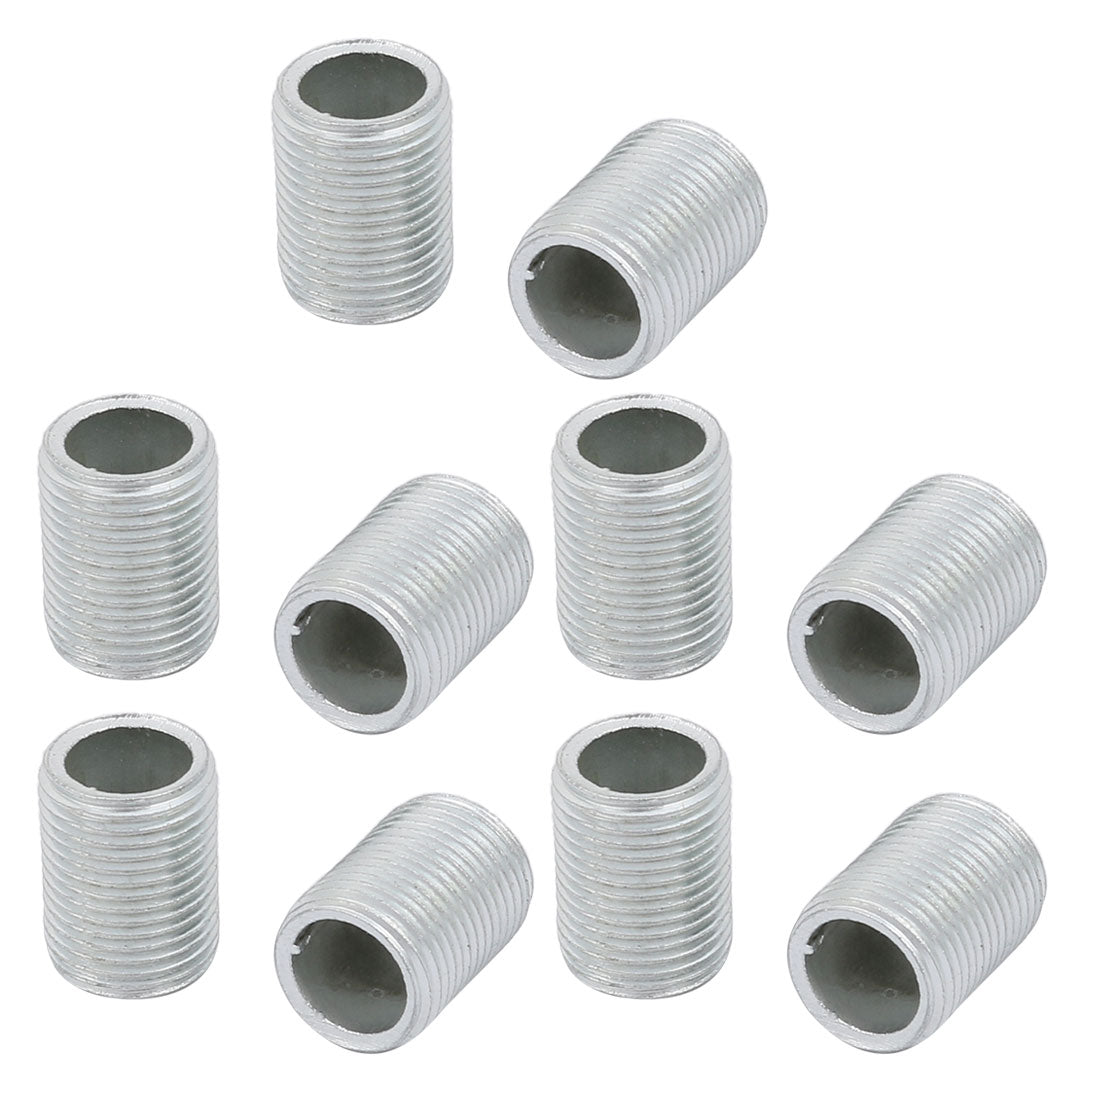 uxcell Uxcell 10 Pcs Metric M12 1mm Pitch Thread Zinc Plated Pipe Nipple Lamp Parts 15mm Long